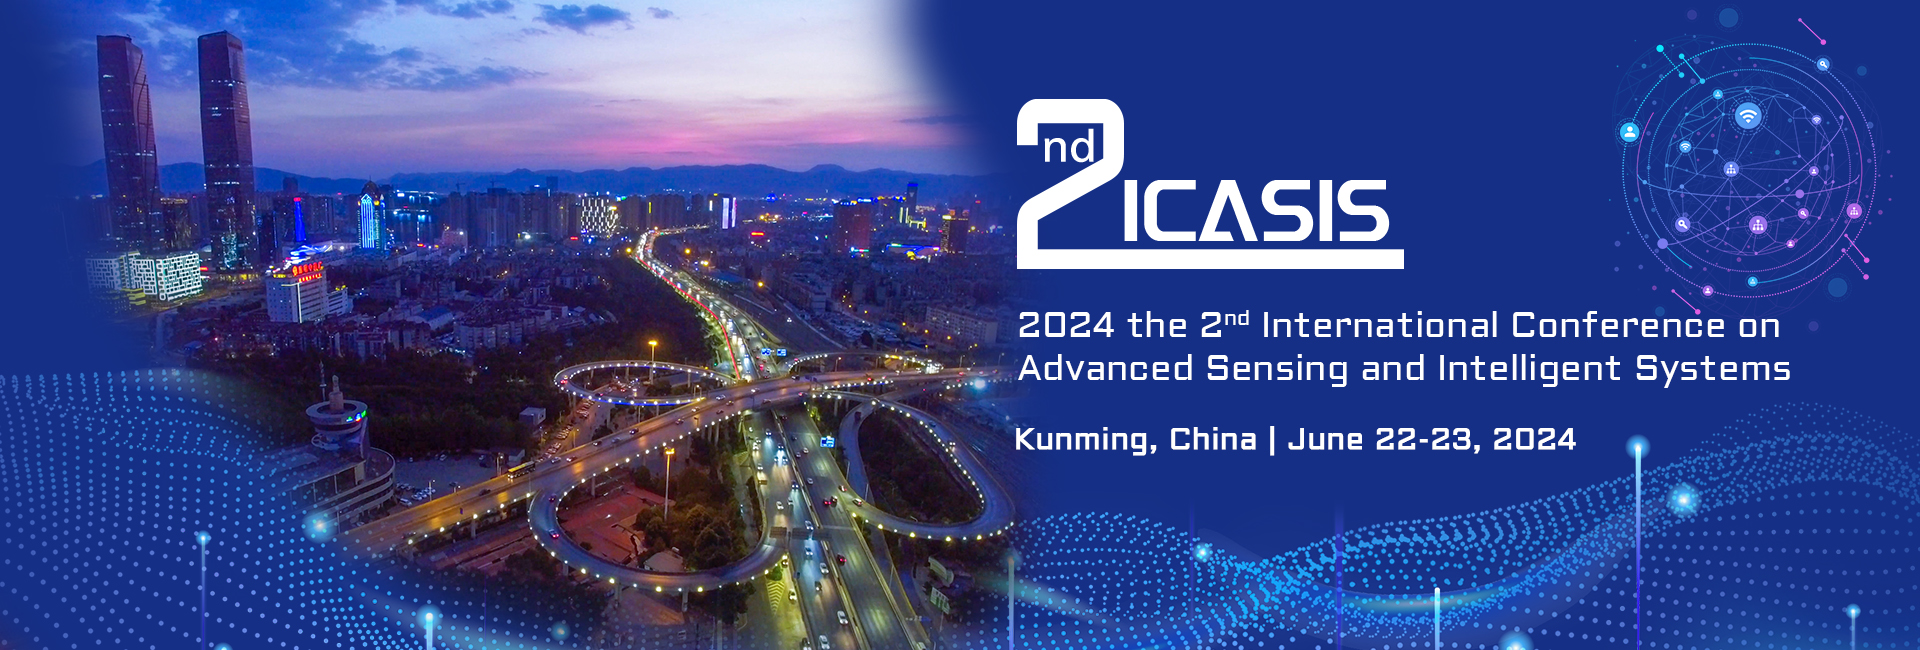 2024 International Conference on Advanced Sensing and Intelligent Systems